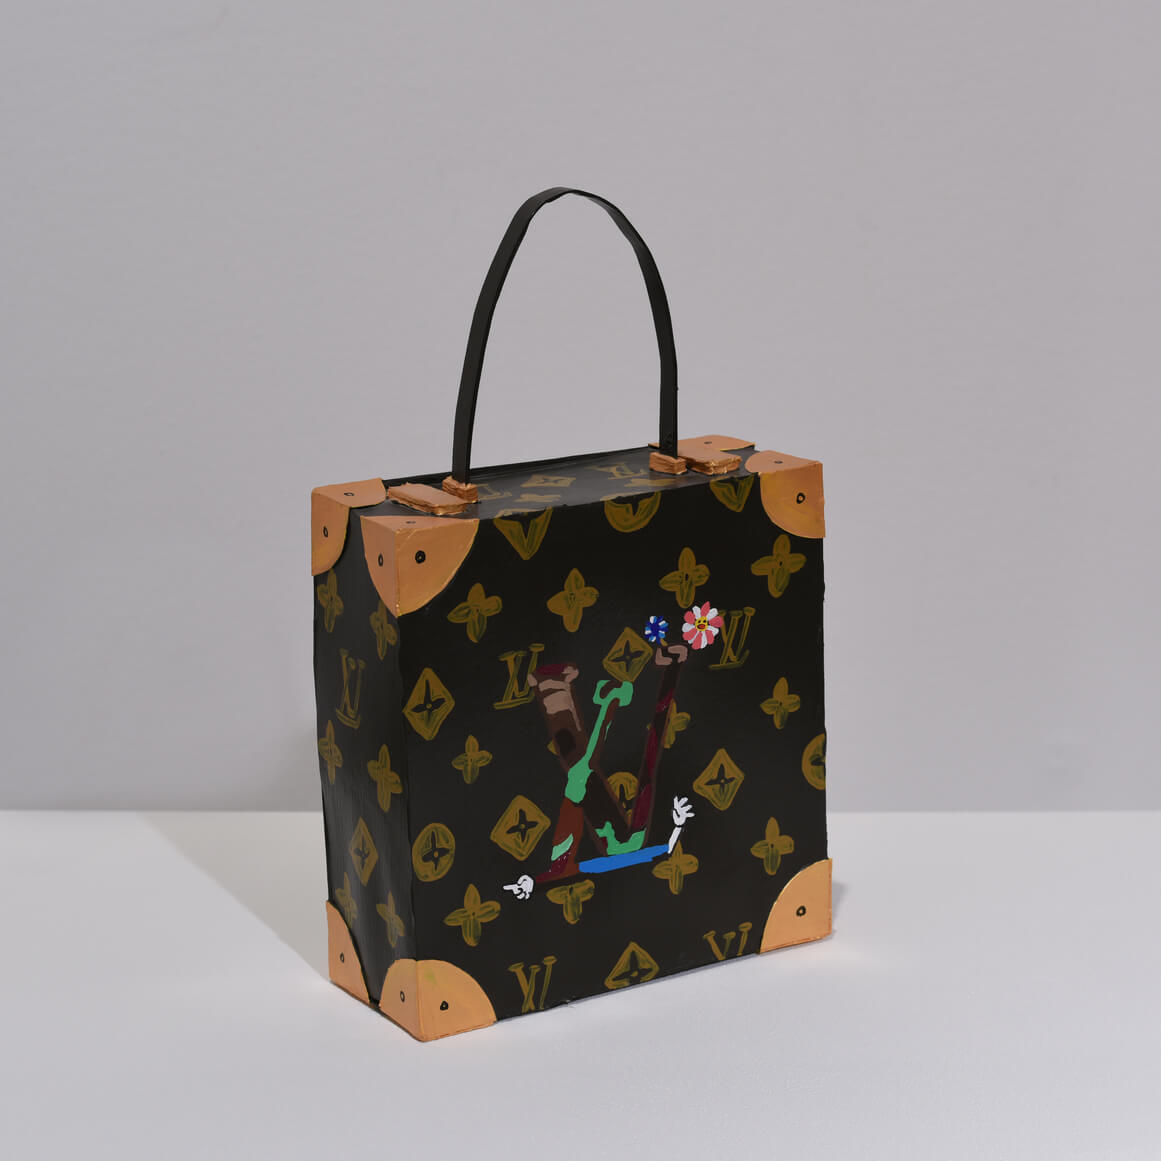 Image of artwork Louis Vuitton Purse by Libby Black